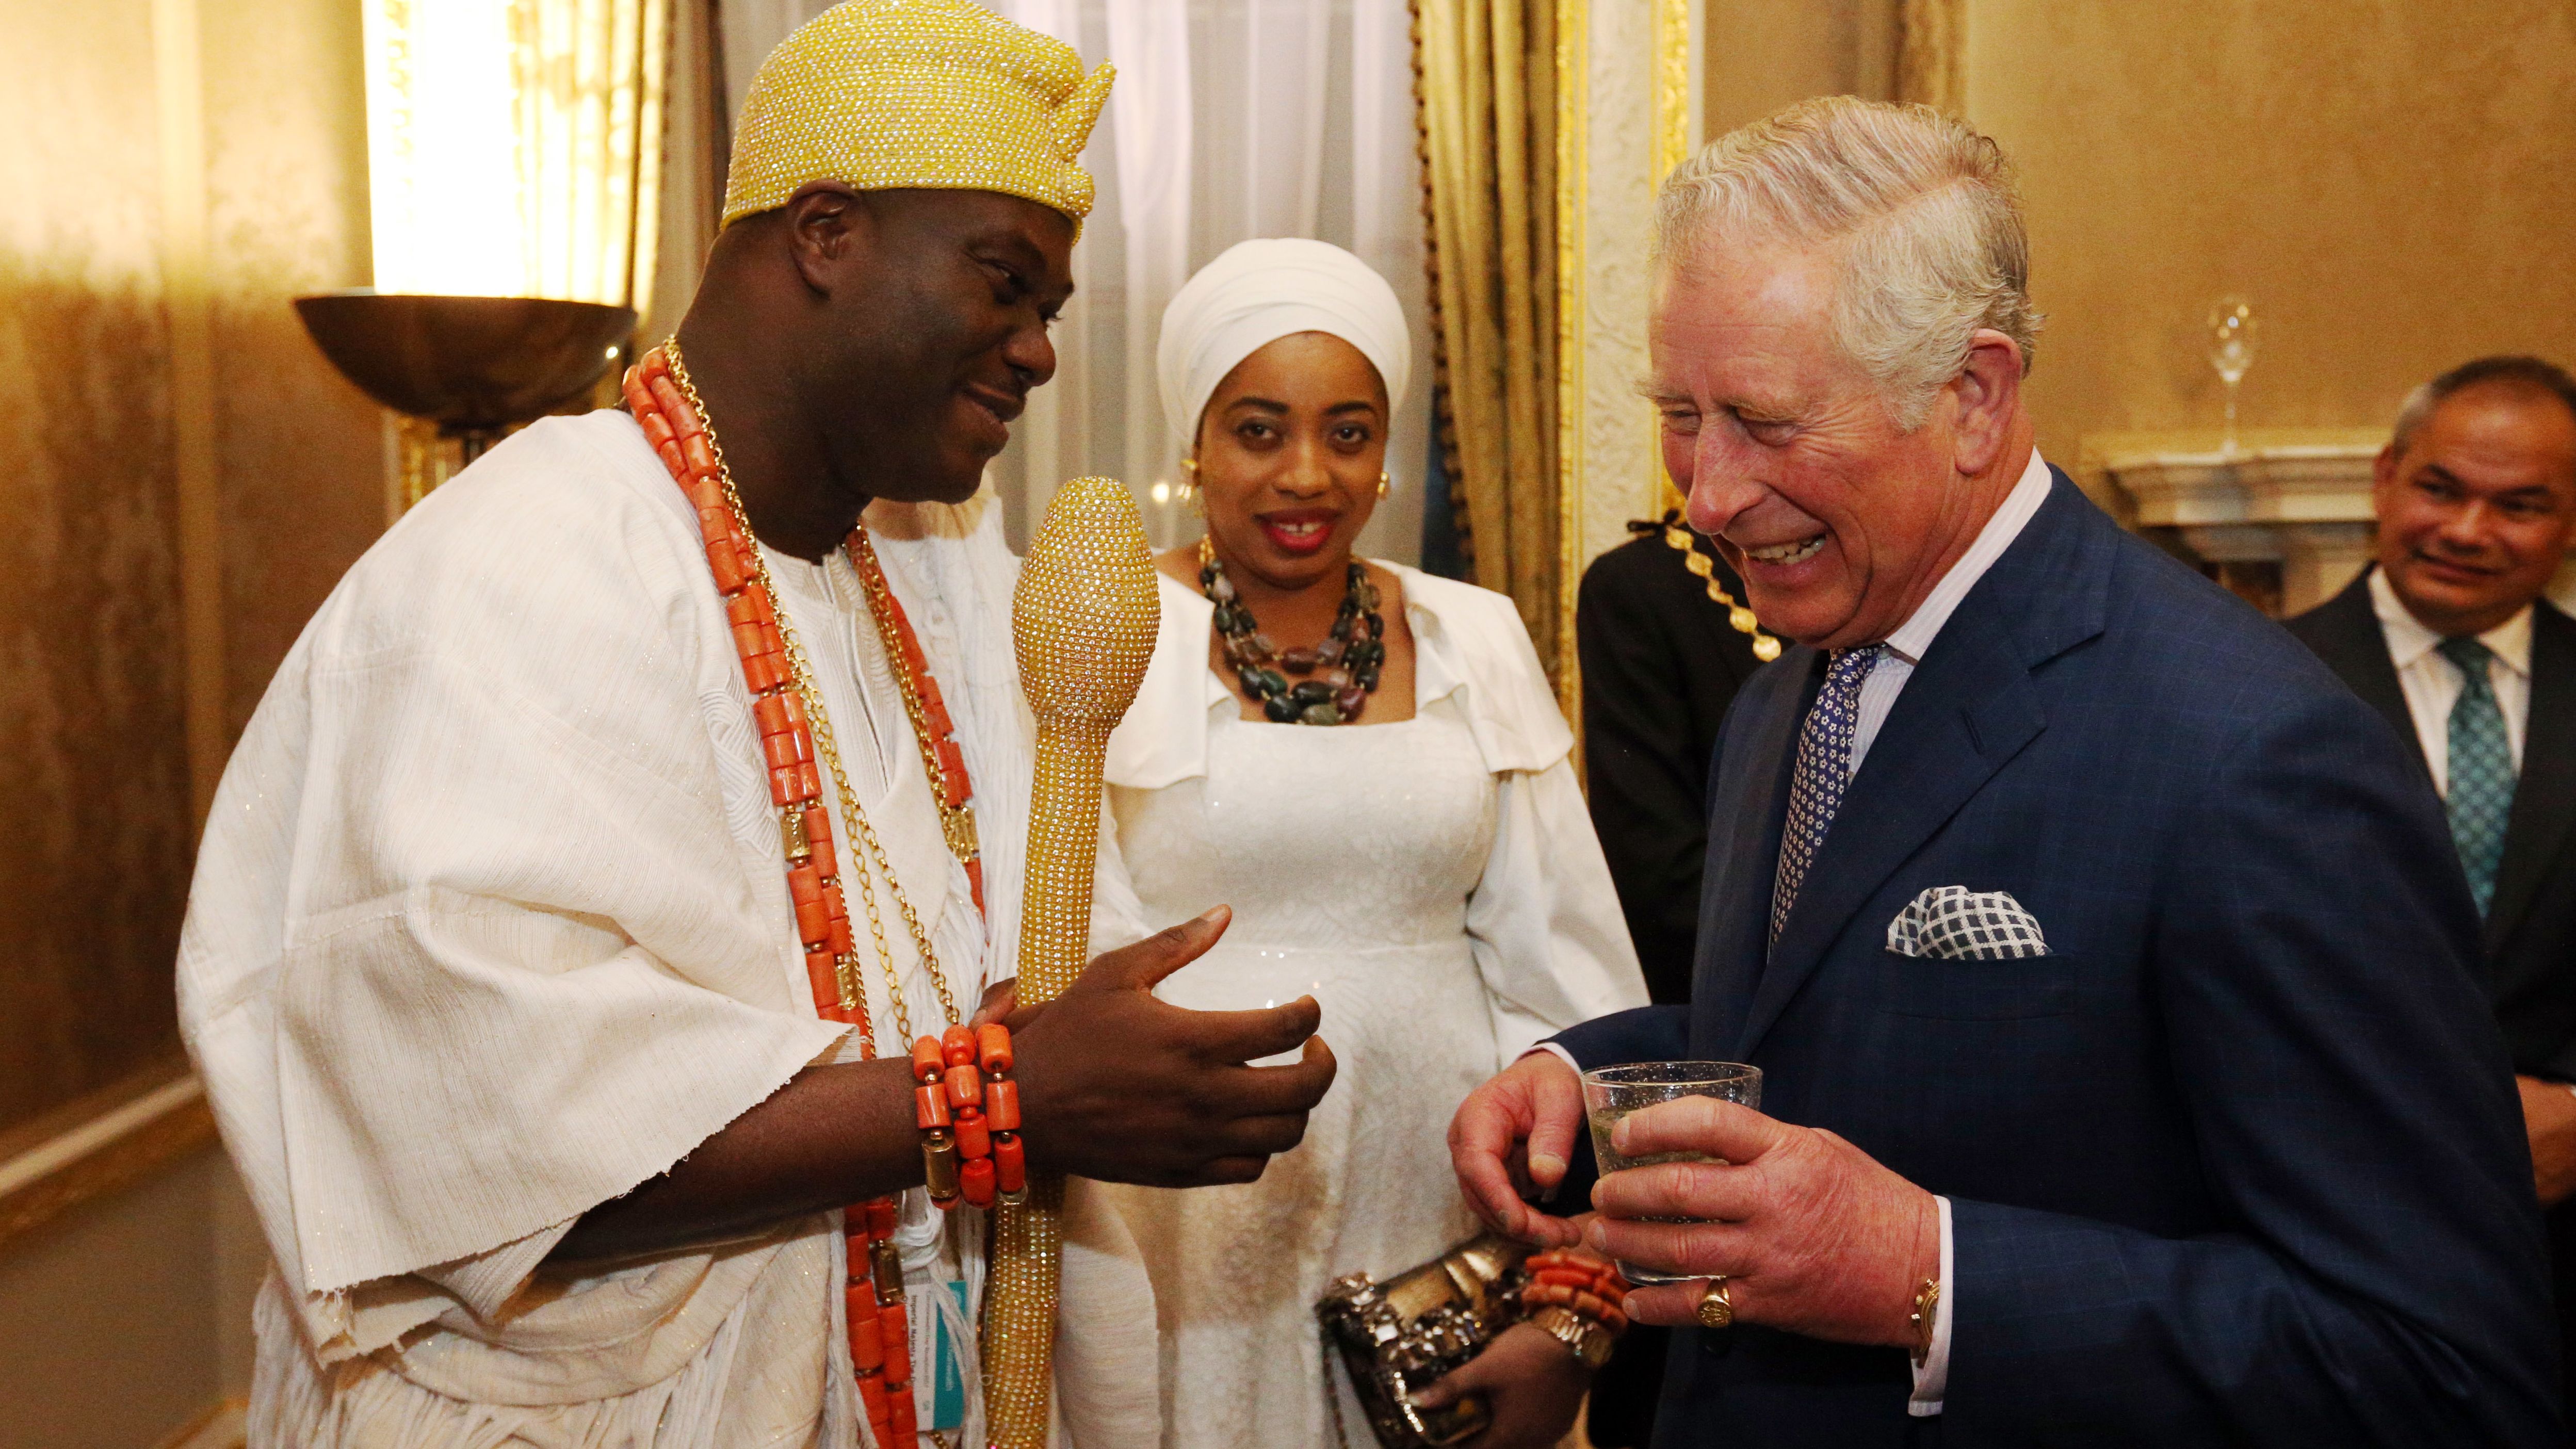 The Ooni of Ife and his wife meet with Prince Charles in London as he attends the annual Commonwealth Day Reception on March 13 2017. 